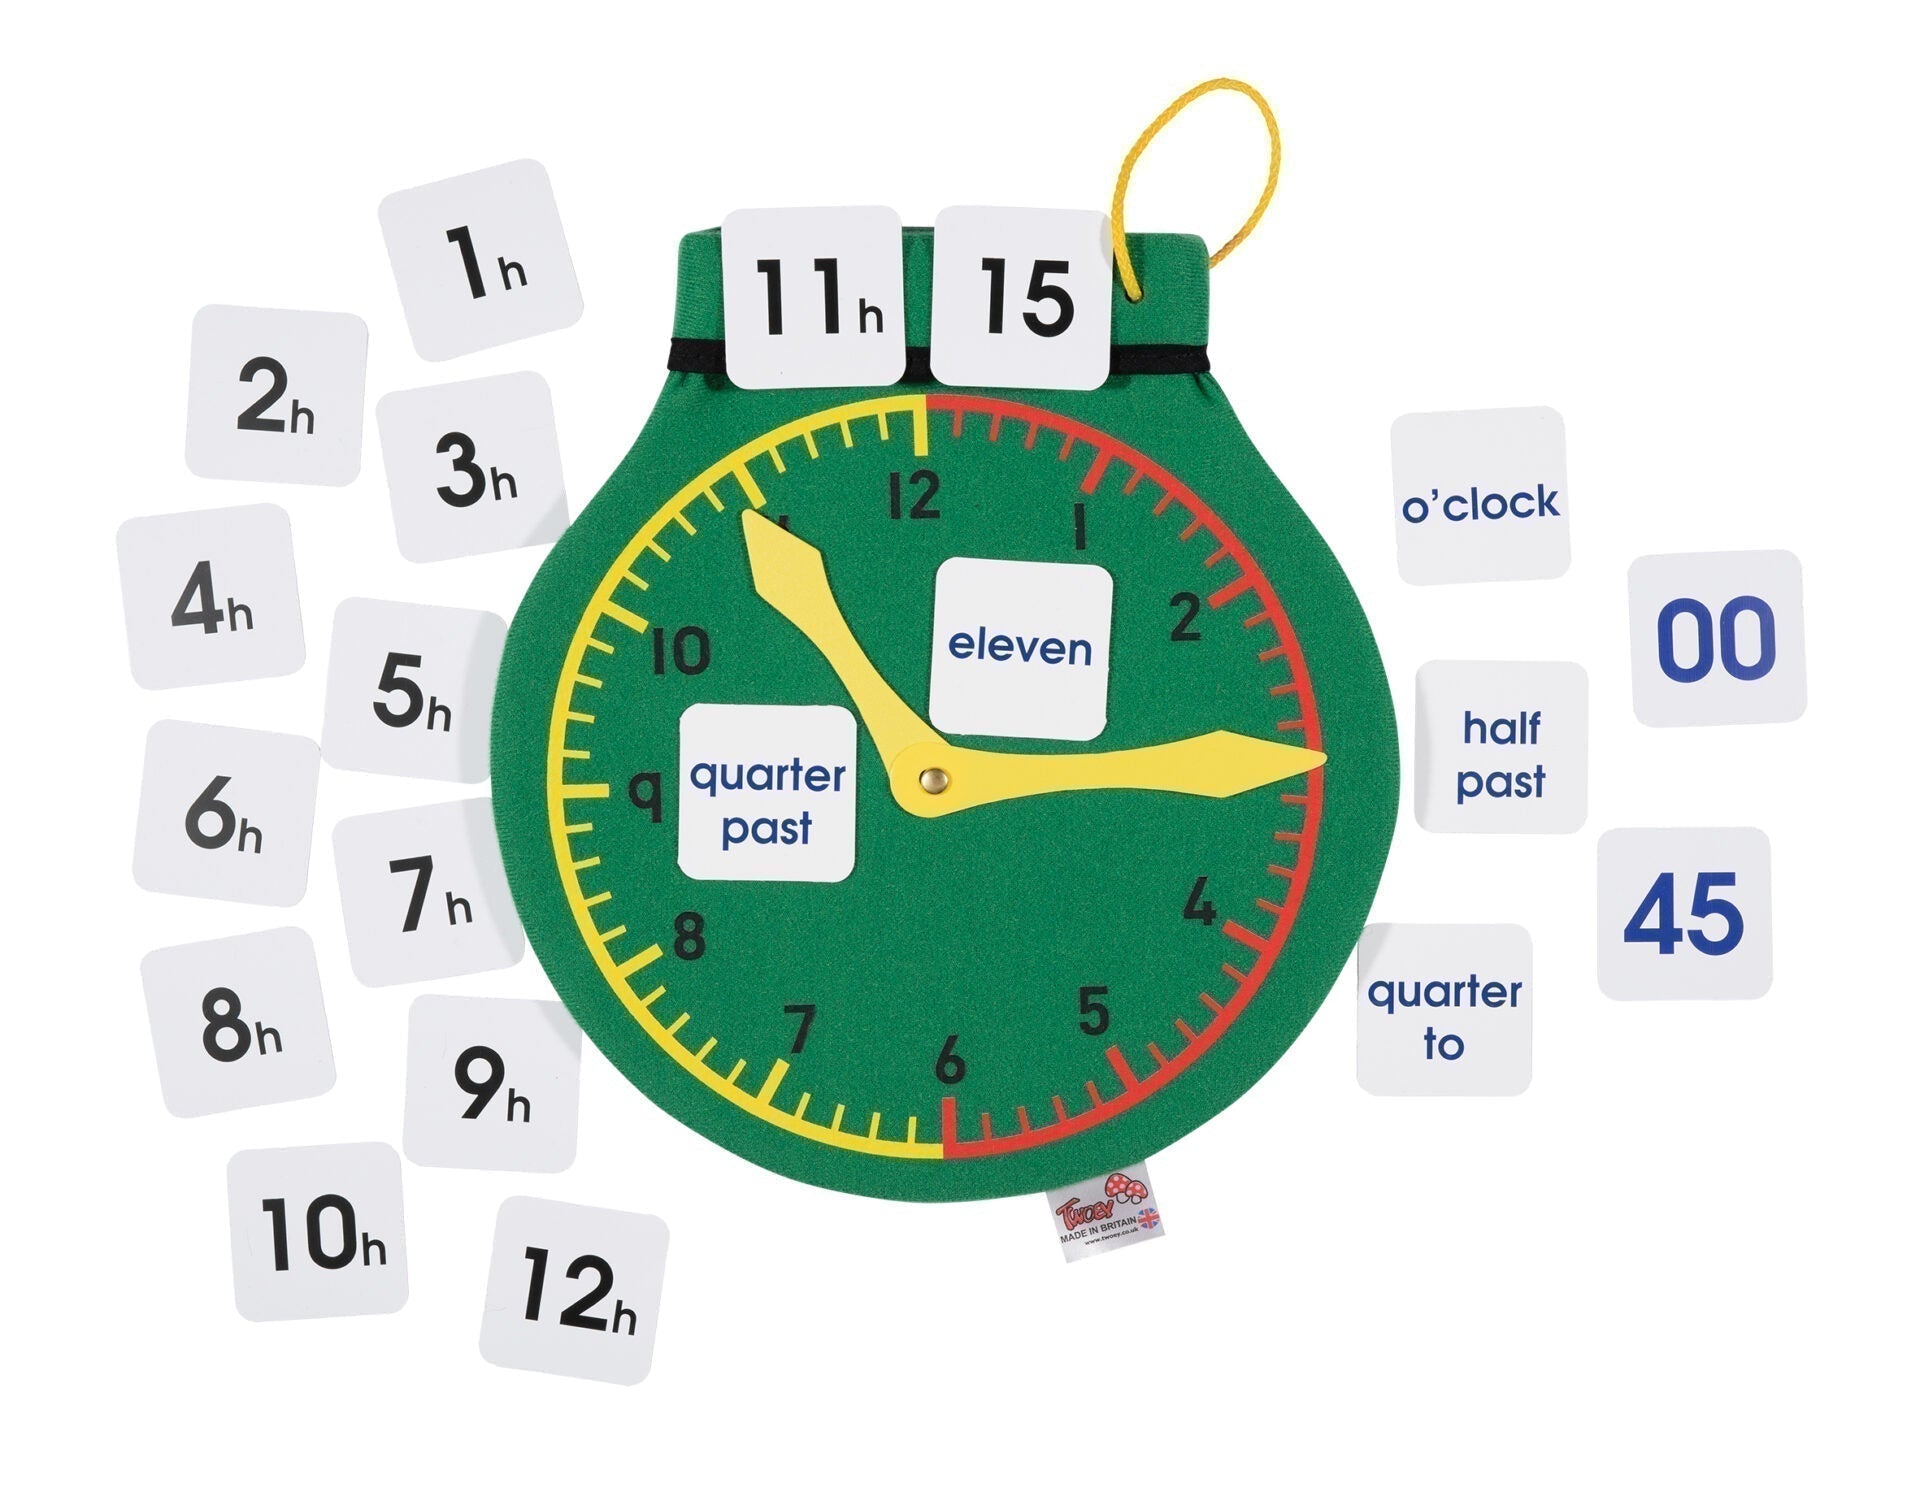 Bag of Time, The Bag of Time is the ultimate teaching tool for mastering both digital and analogue time. Designed with utmost creativity, this ingenious bag features an embroidered clock face with fully moveable hands, allowing for interactive learning experiences.Included with the Bag of Time is a comprehensive set of word and number labels, ensuring that learners have all the necessary tools to grasp the concept of reading and recording time, both in analogue and digital formats. This versatile resource e